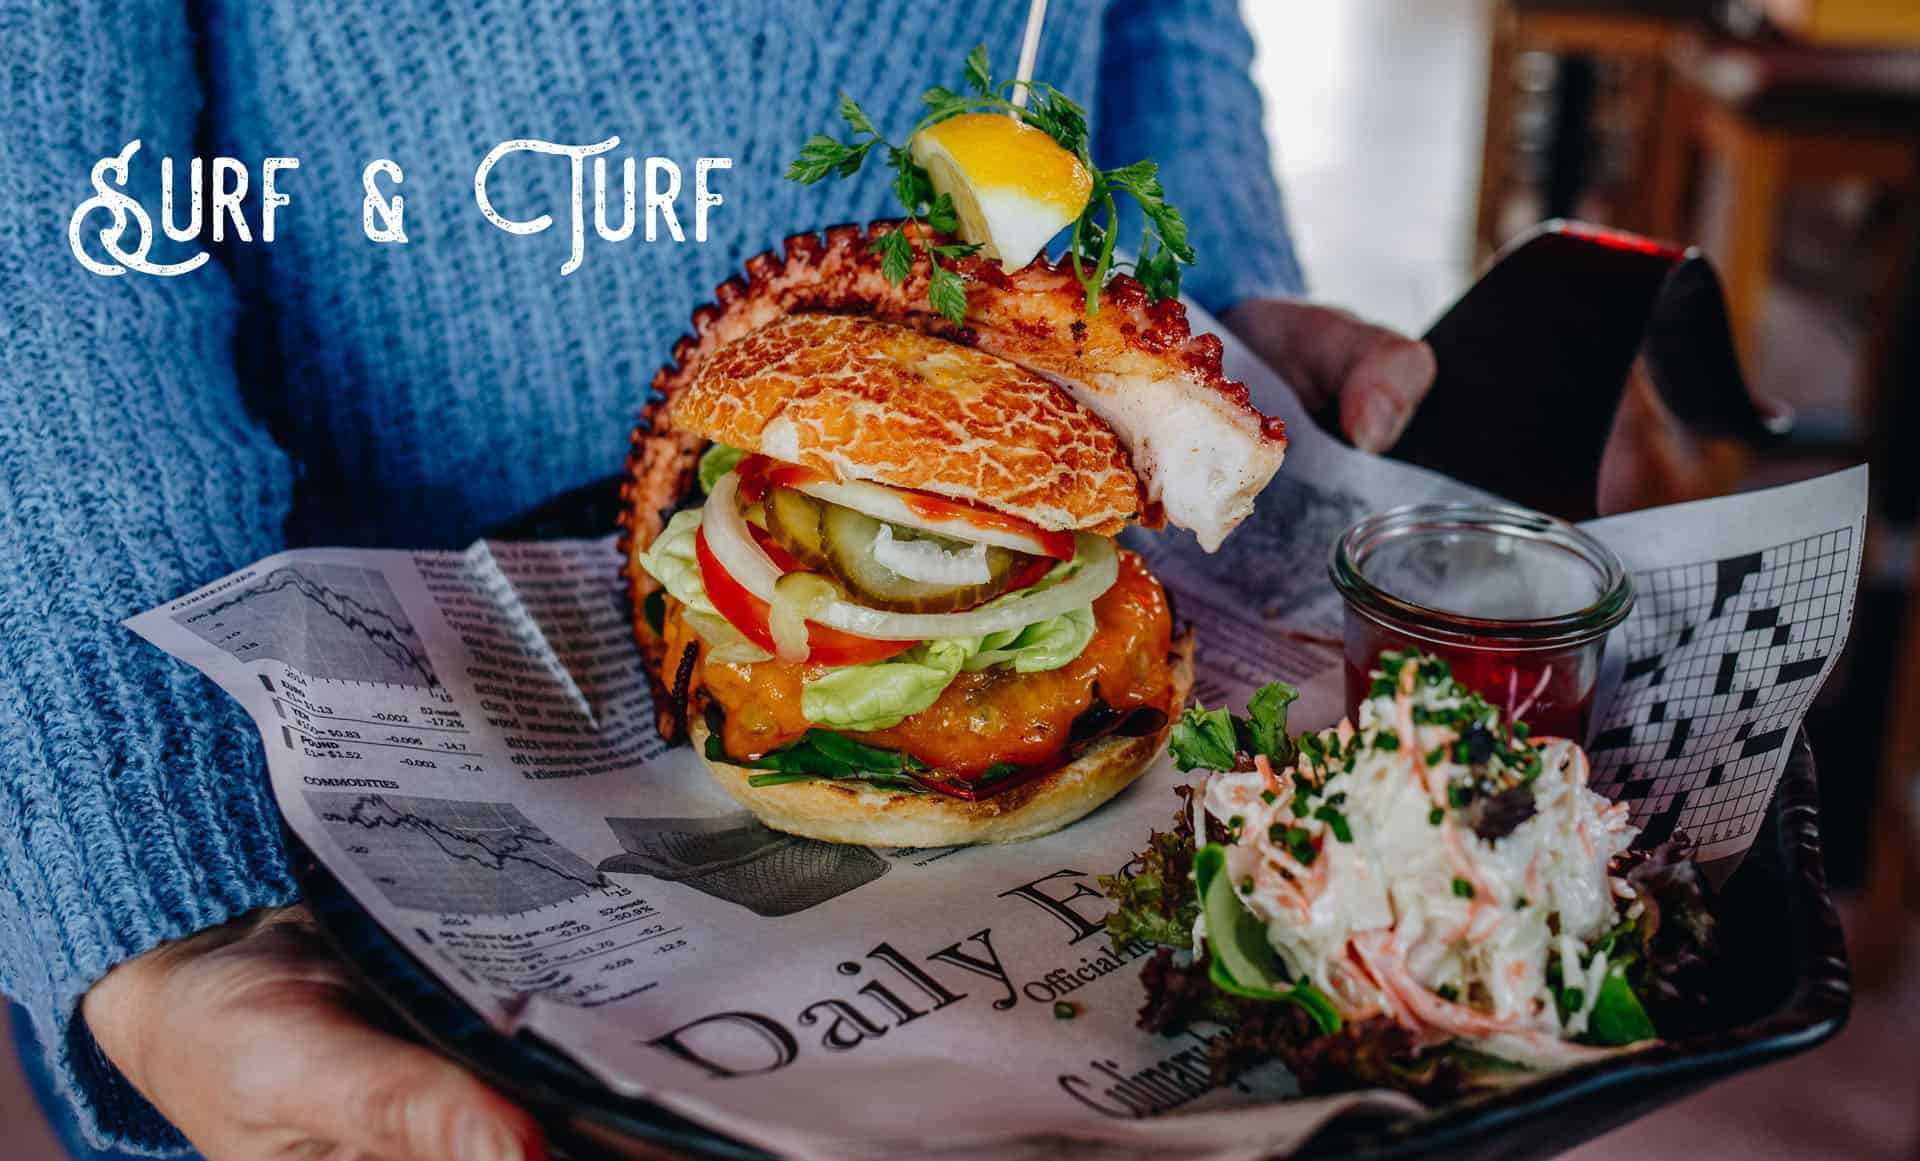 Pier 67: Surf and Turf Burger